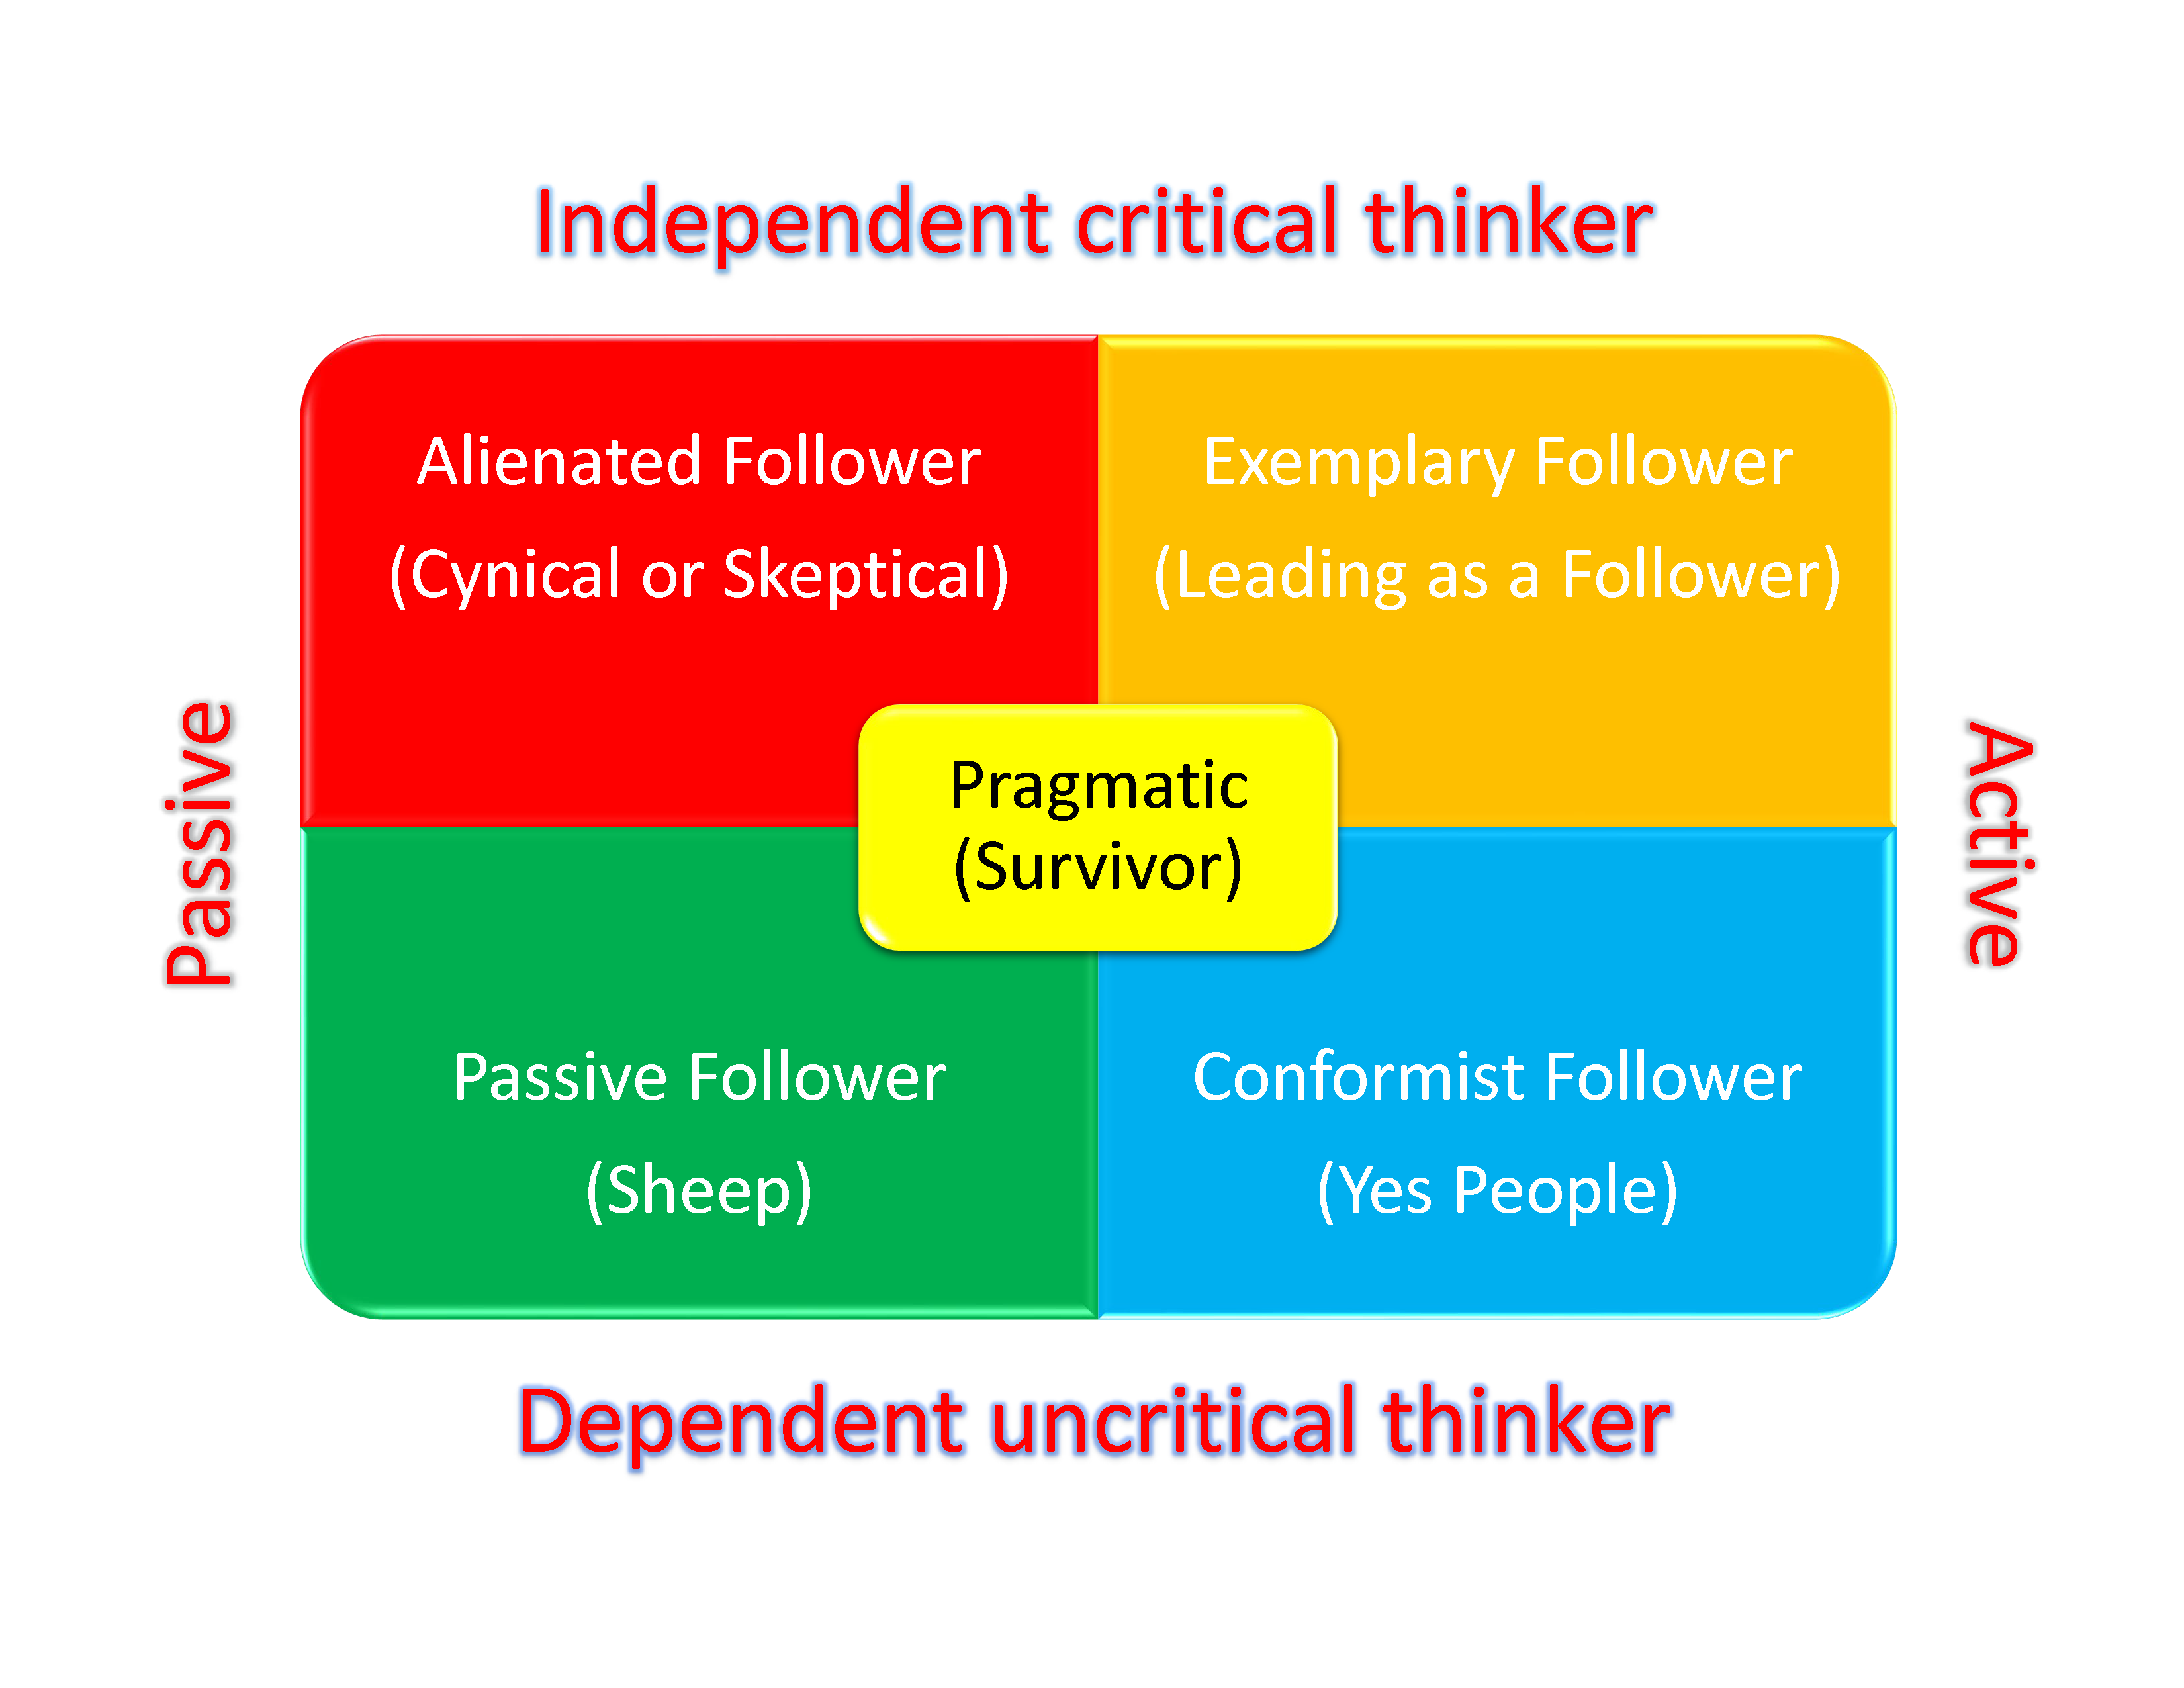 Independent critical thinker-Dependent uncritical thinker, passive-active; alienated follower (cynical or skeptical); exemplary follower (leading as a follower); passive follower (sheep); conformist follower (yes people); pragmatic (survivor)